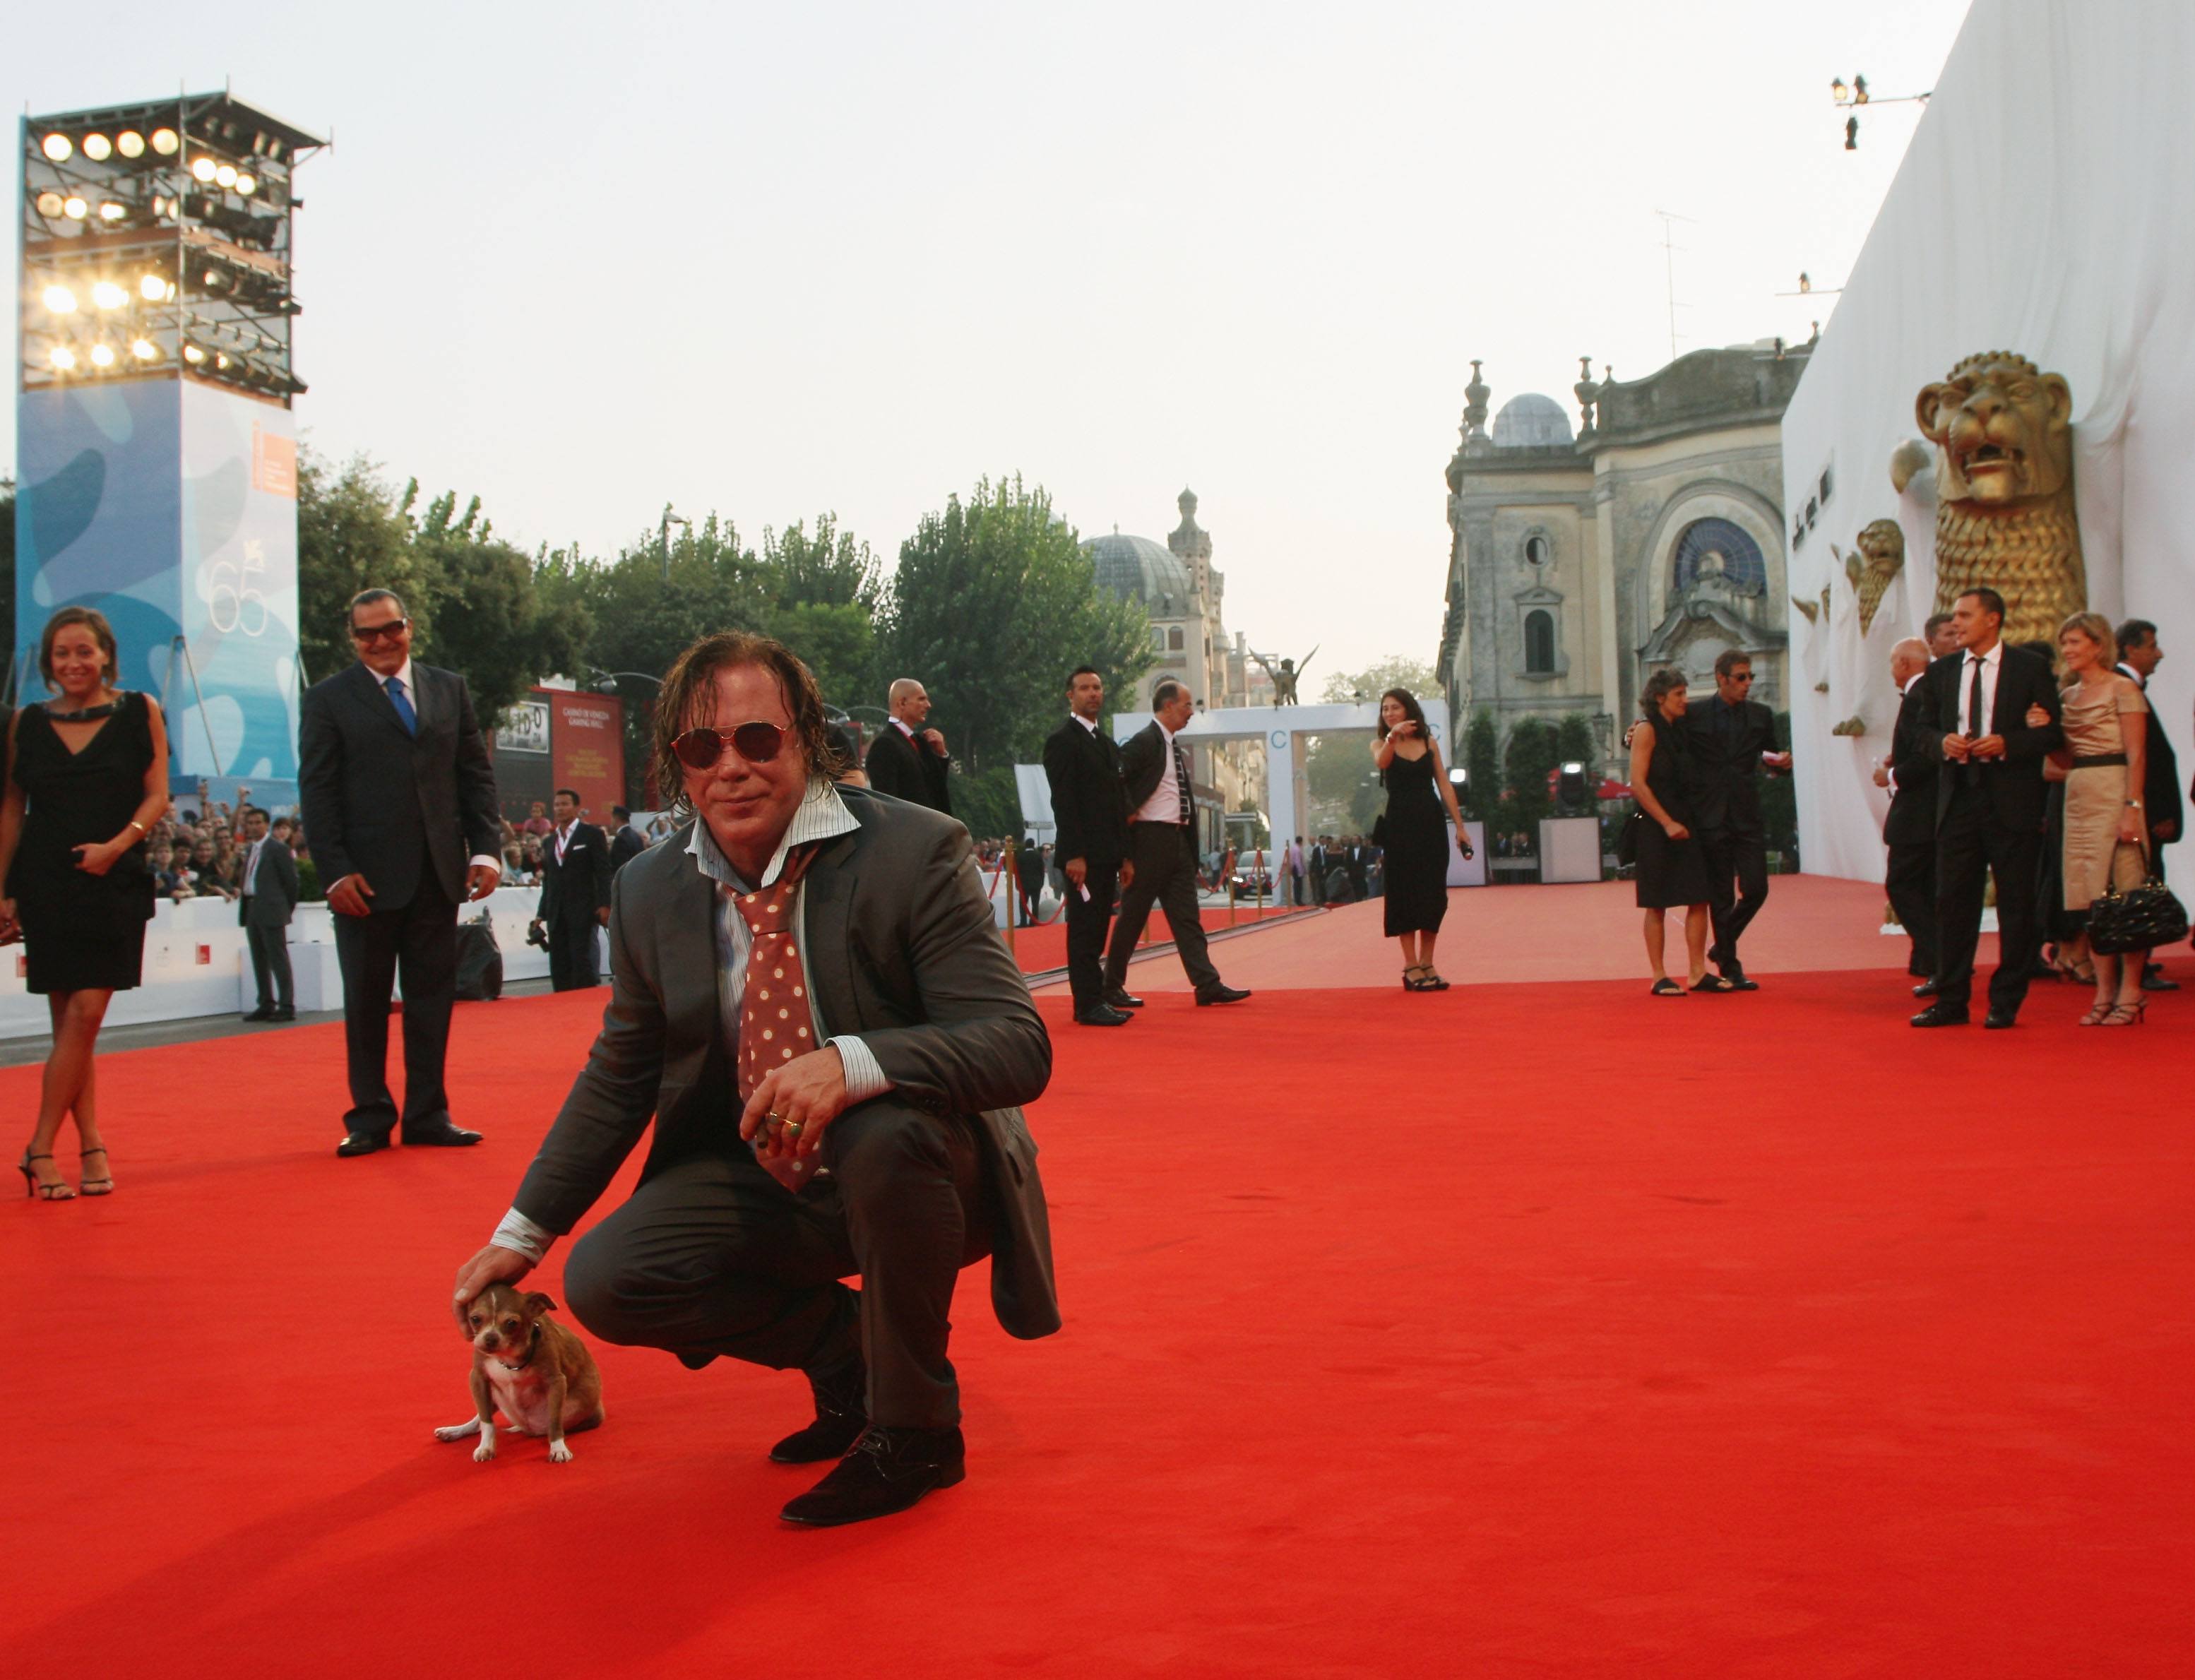 Actor Mickey Rourke and dog Loki attend the 65th Venice Film Festival Closing Ceremony at the at the Sala Grande on September 6, 2008 in Venice, Italy.